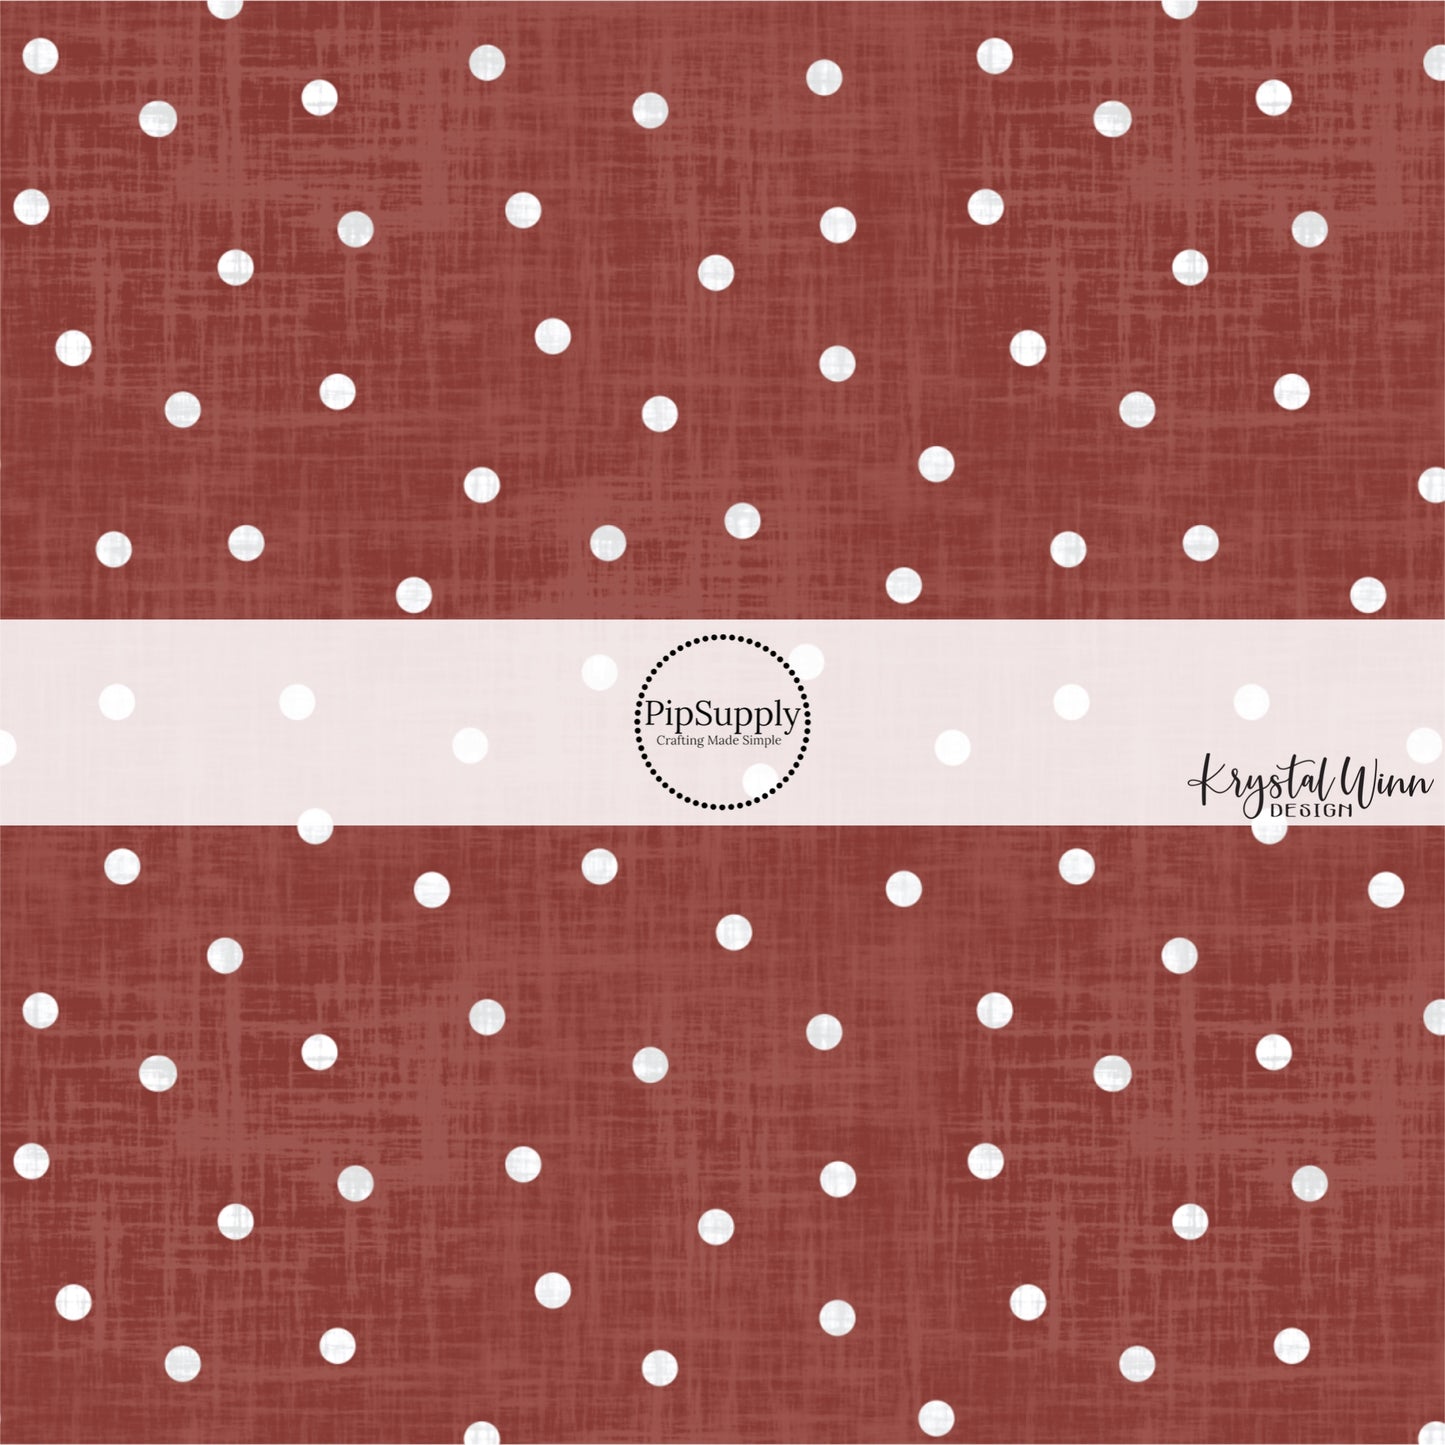 Mahogany red faux linen fabric by the yard with white scattered dots.